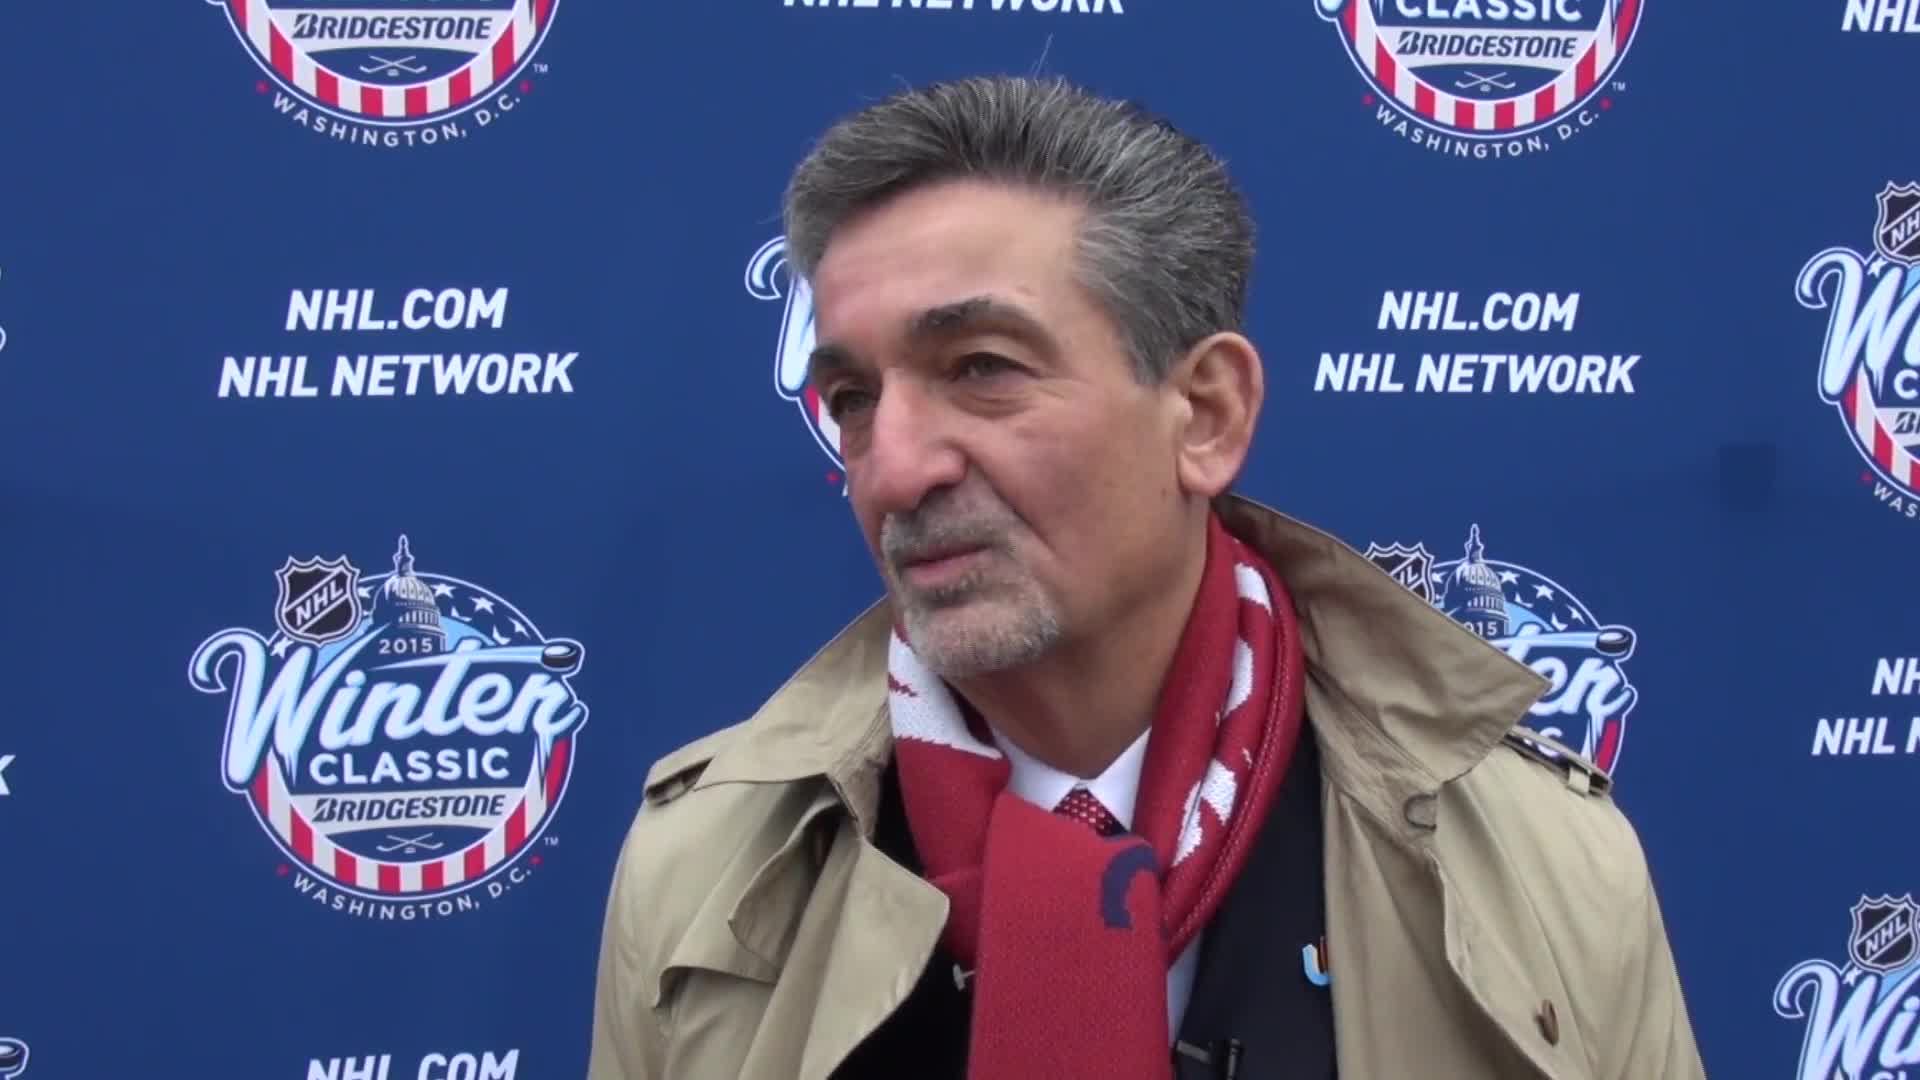 Ted Leonsis on bringing Olympic games to D.C.: 'I want to disprove that we're a dysfunctional community' (Video)